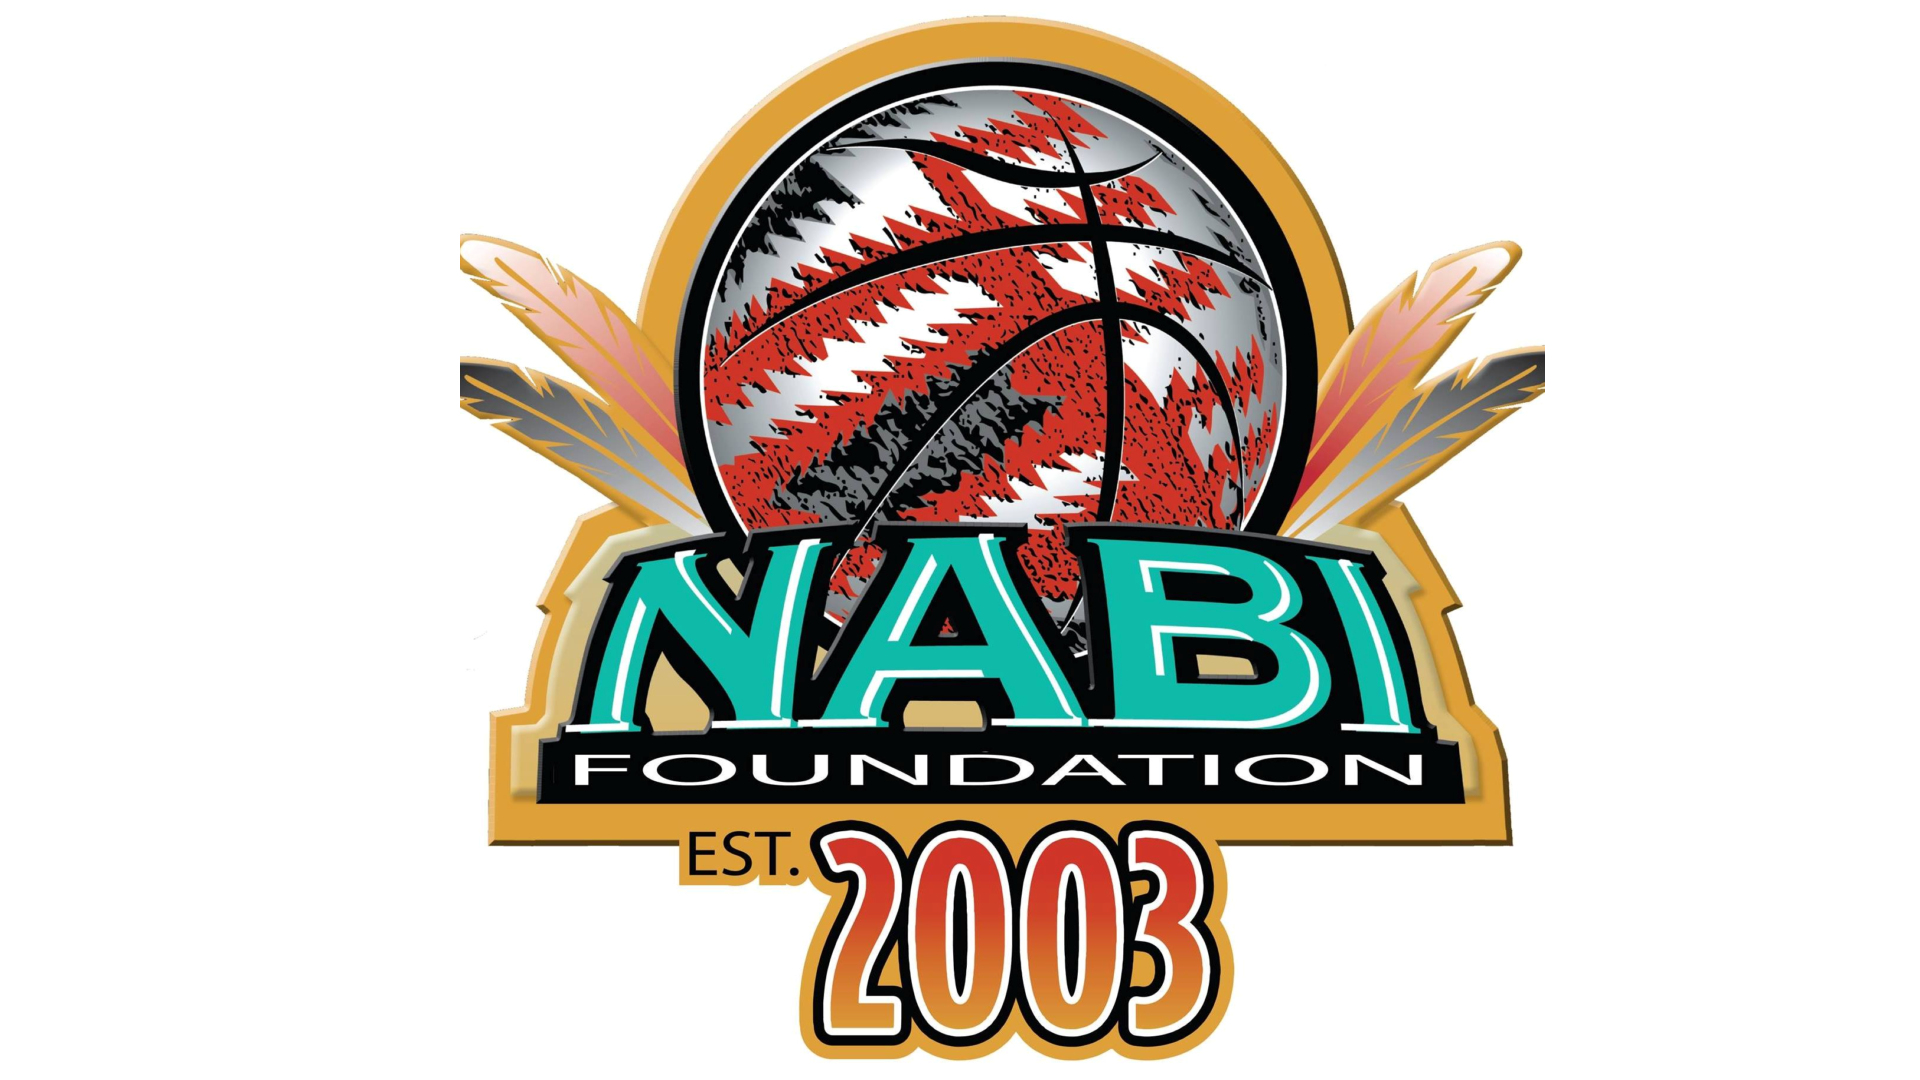 NABI FOUNDATION TO HOST 1 st ANNUAL EDUCATIONAL YOUTH SUMMIT in conjunction with the 17th Annual Native American Basketball Invitational (NABI)